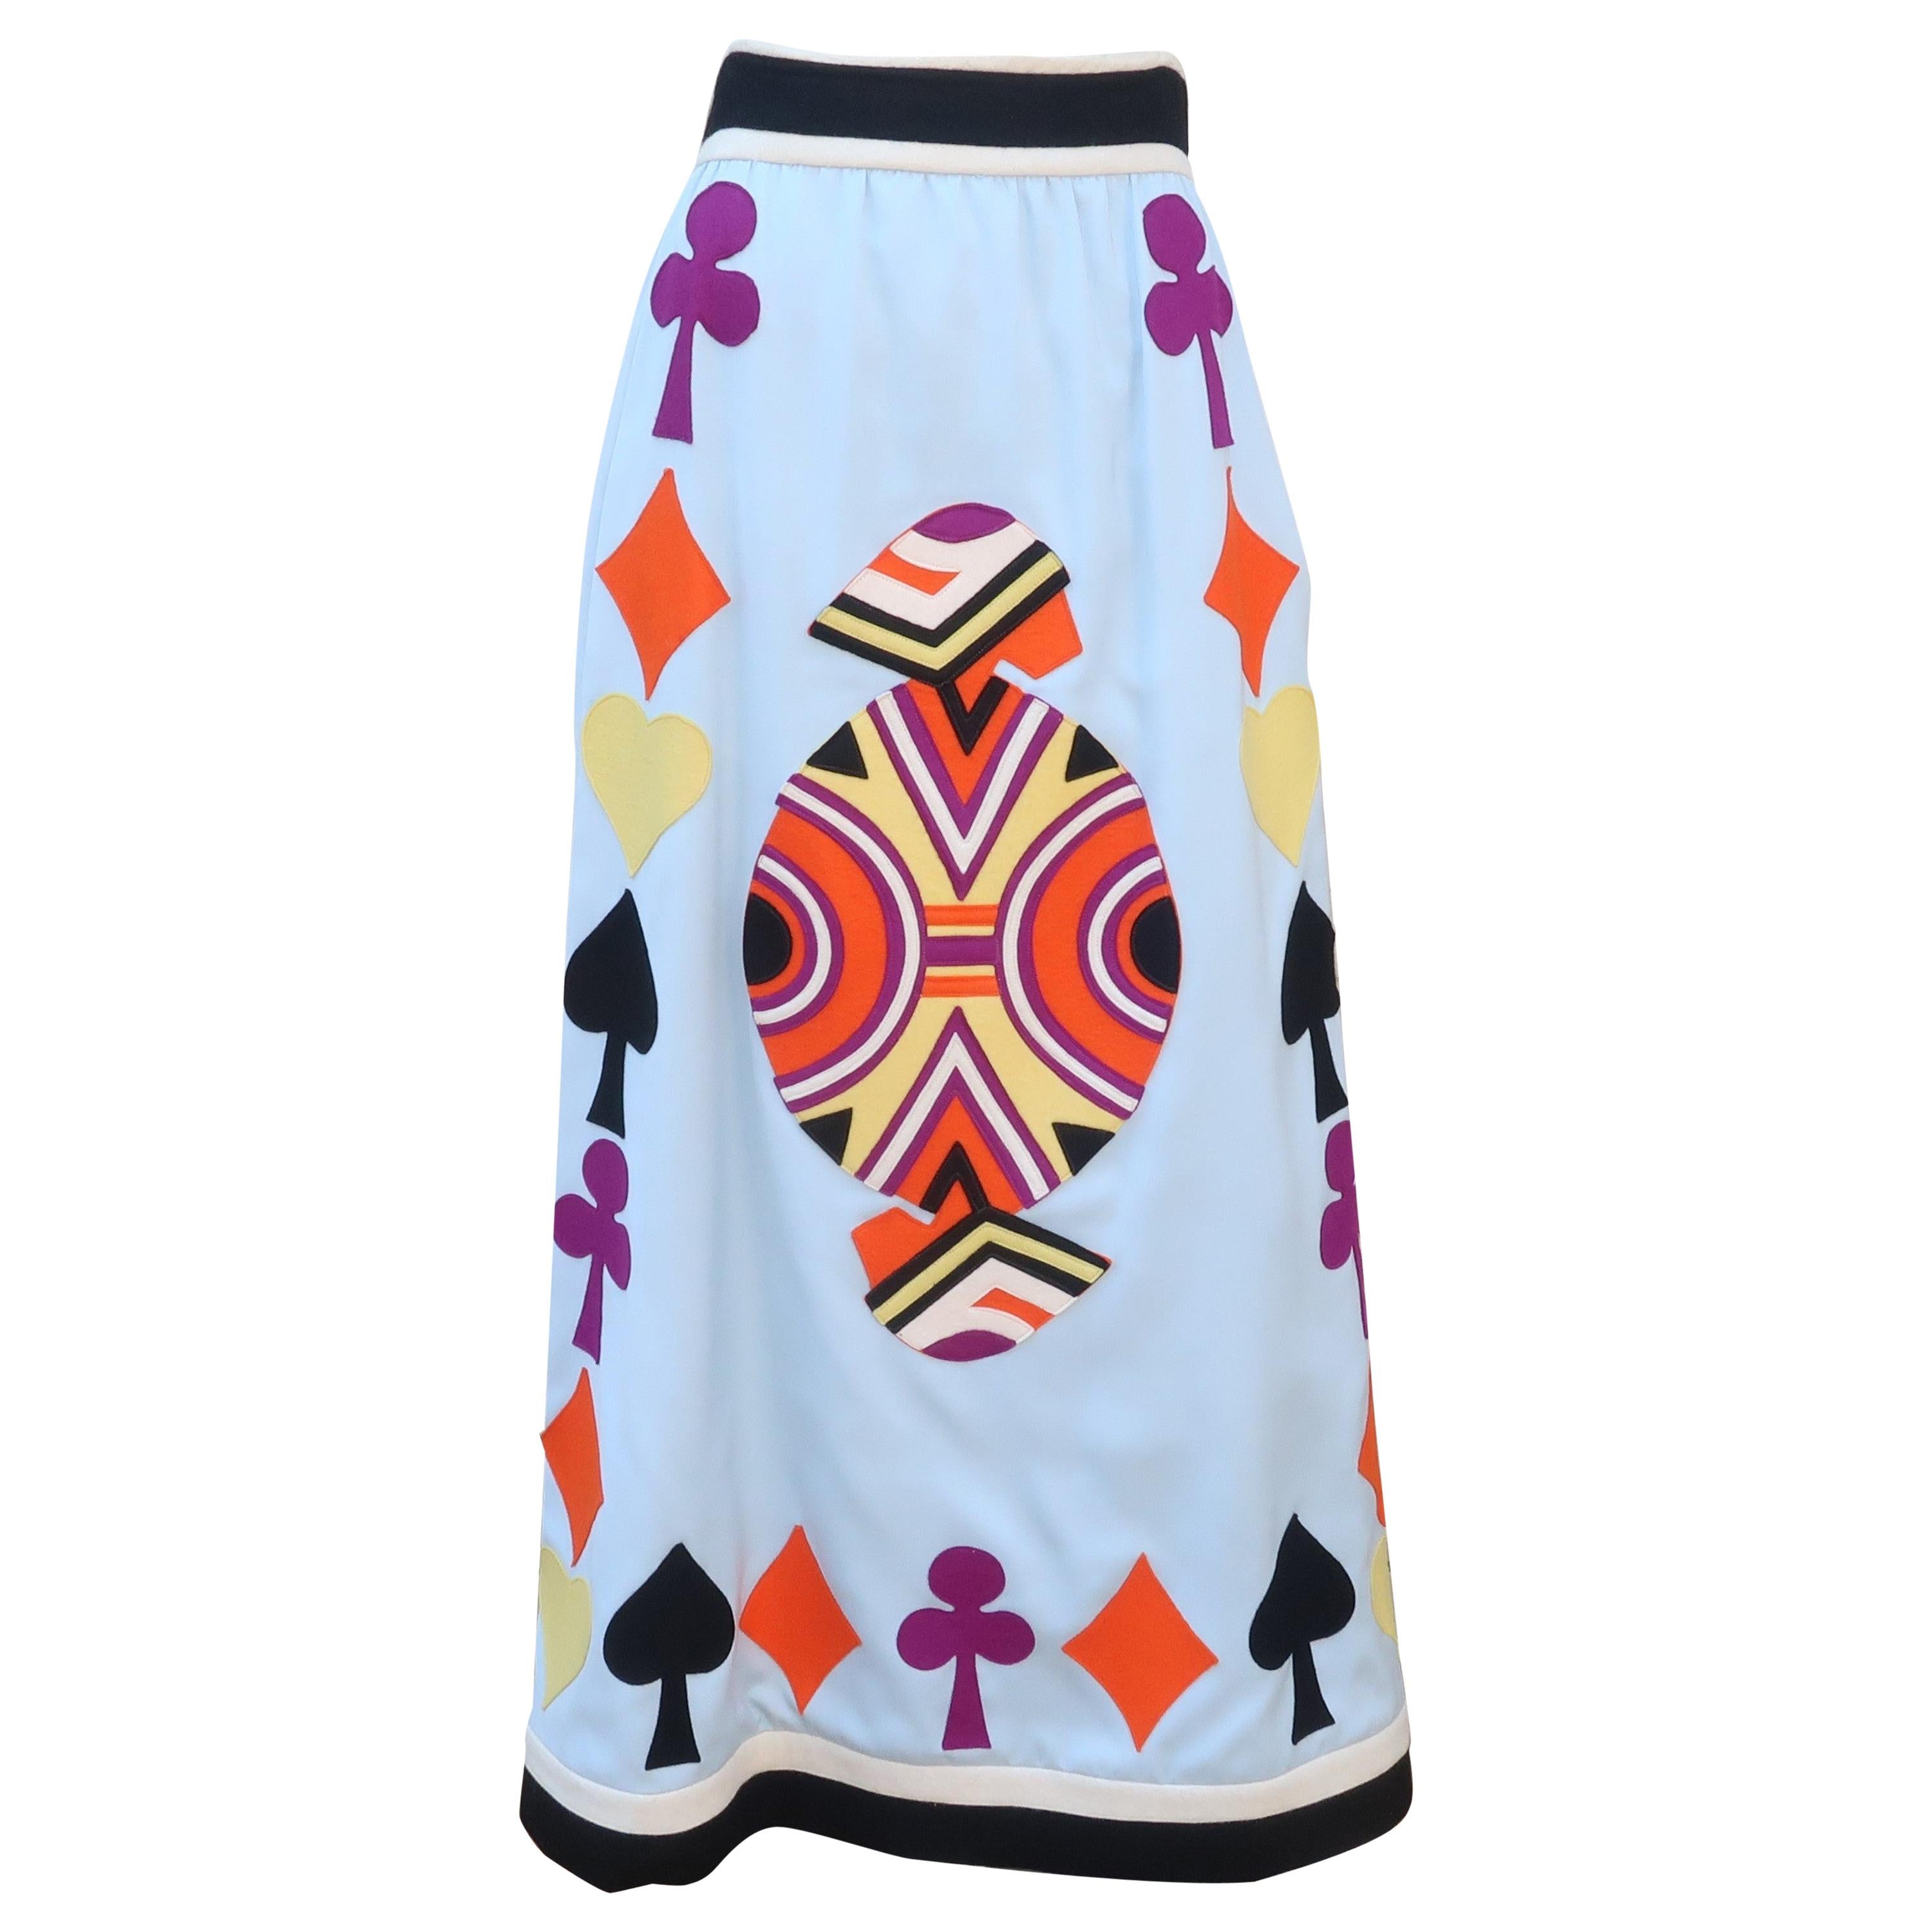 Rizkallah for Malcom Starr Attributed Playing Cards Maxi Skirt, C.1970